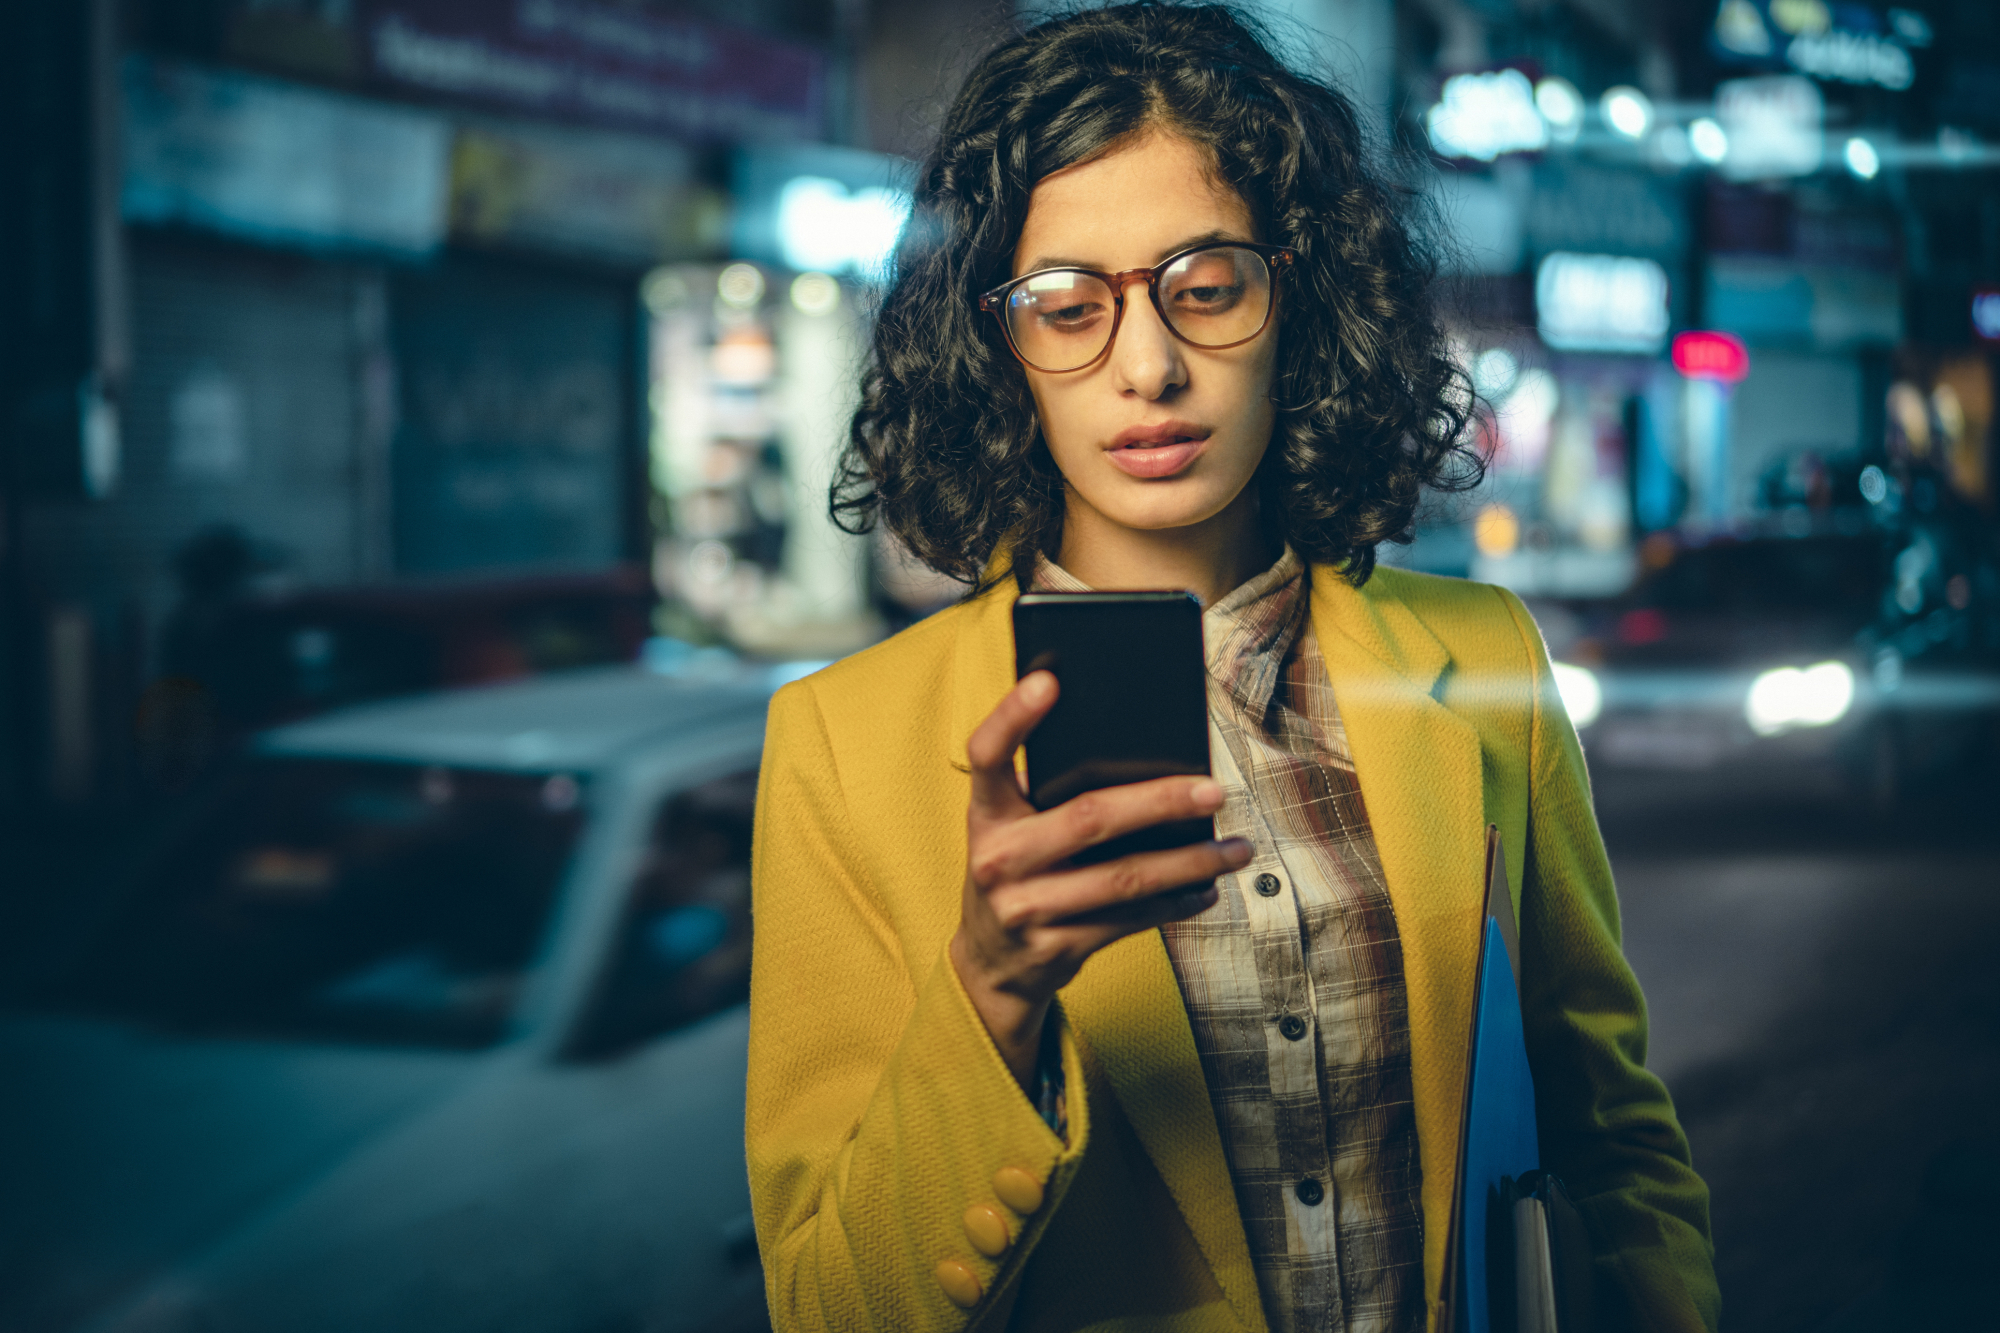 Business woman using phone on a busy road at night